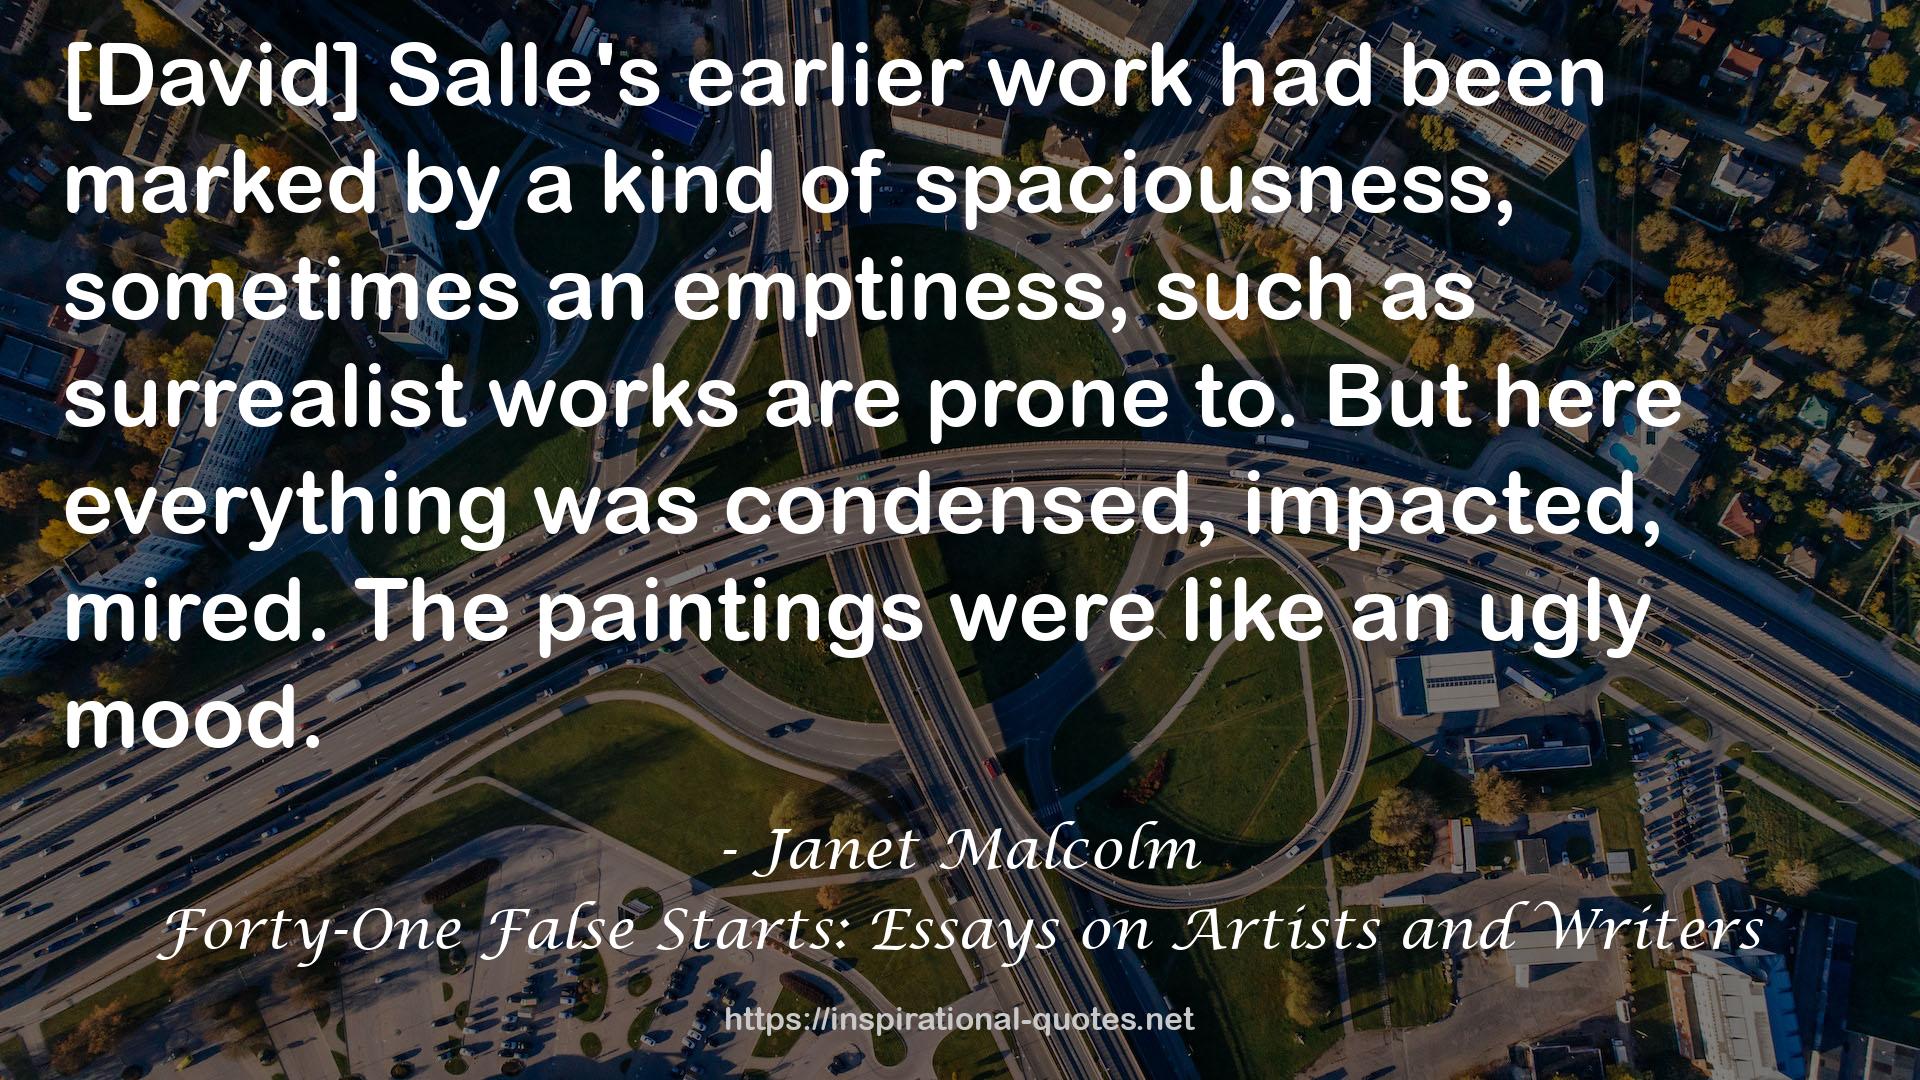 Janet Malcolm QUOTES